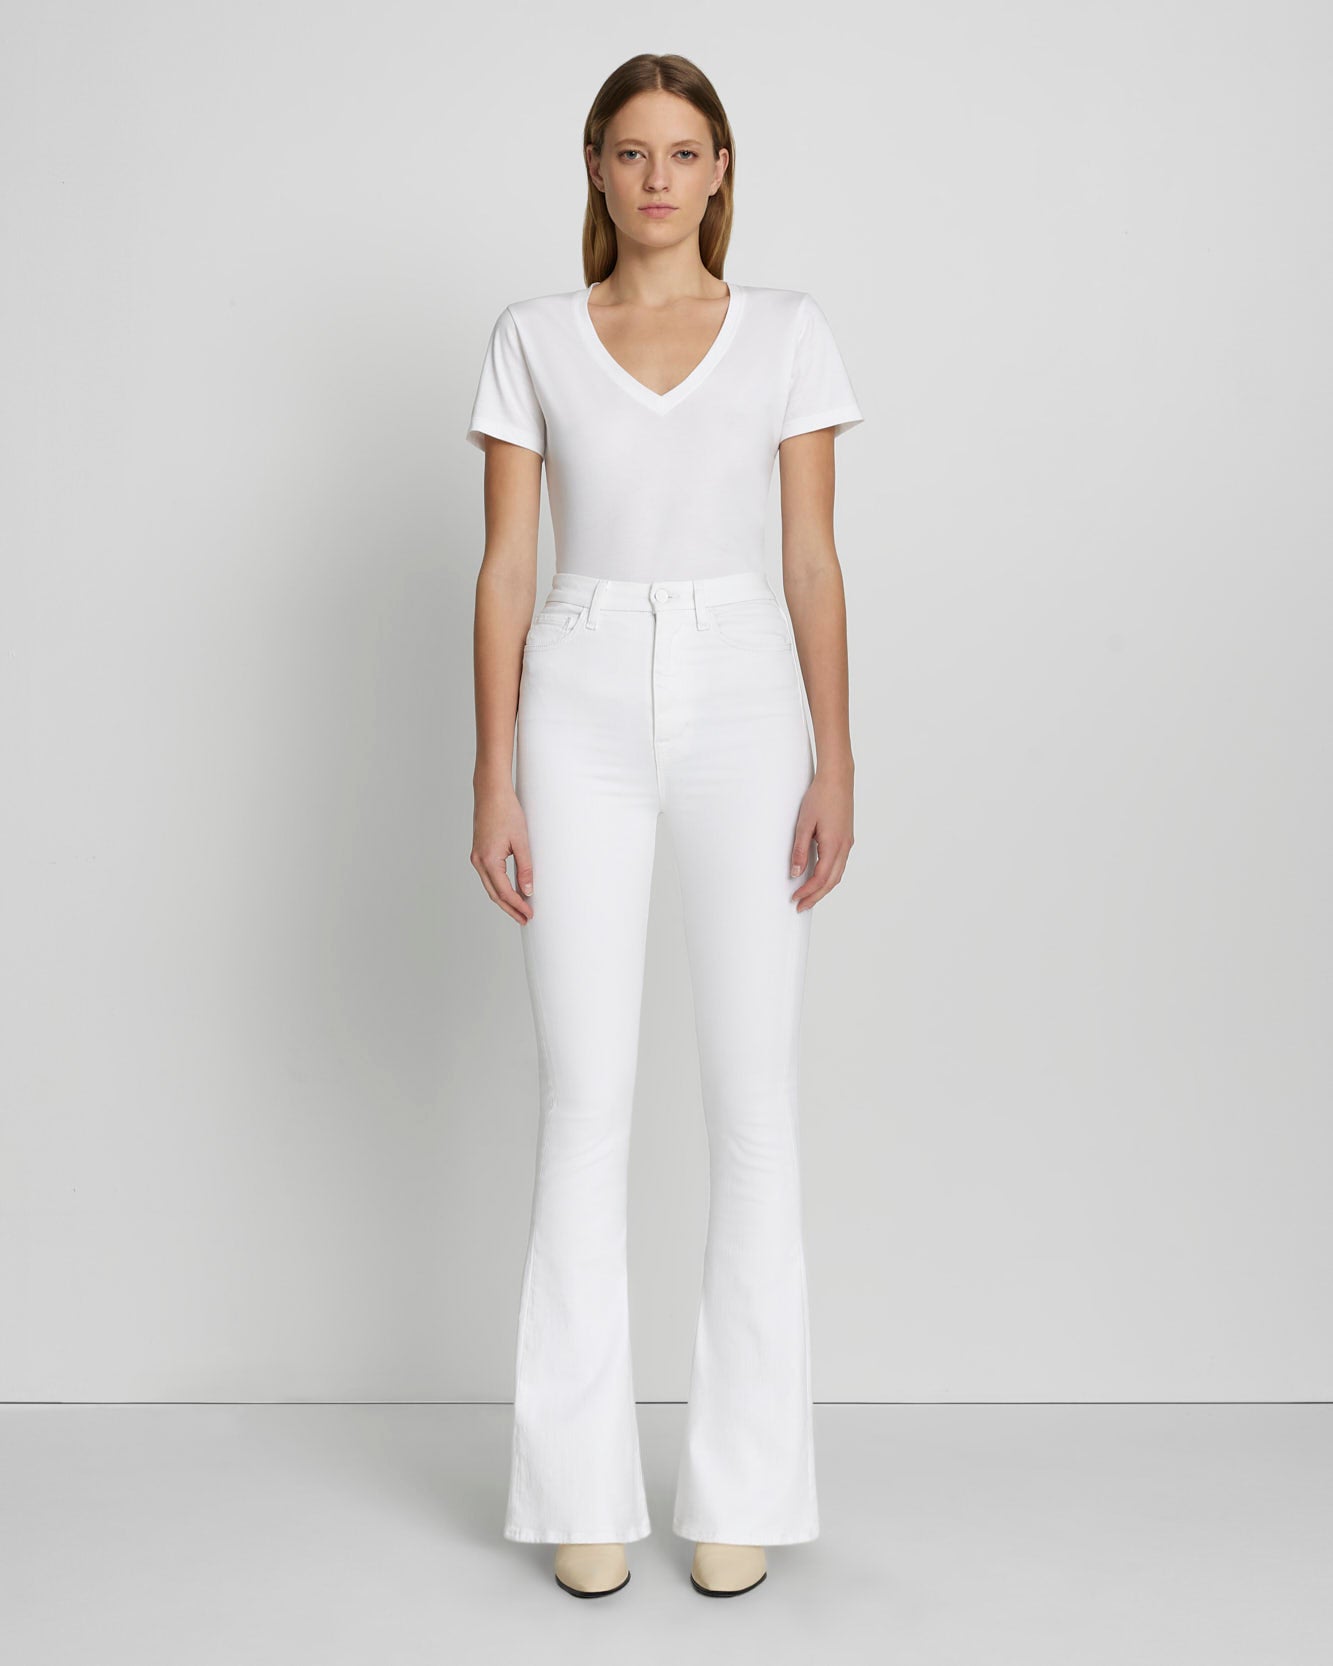 7 For All Mankind low-rise Flared Jeans - Farfetch